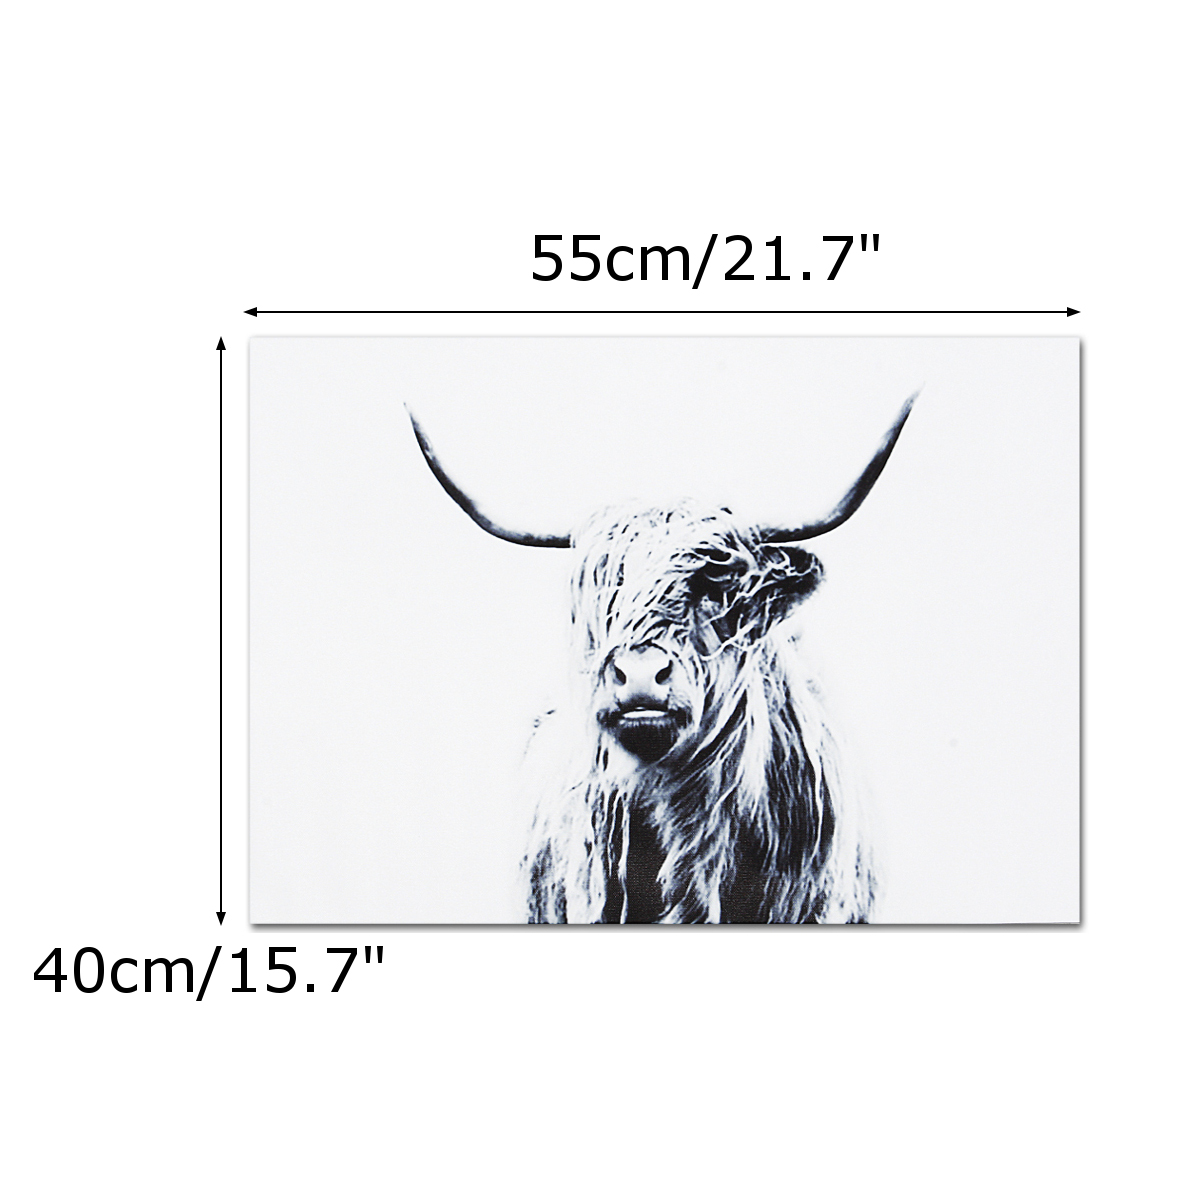 1-Piece-Highland-Cattle-Canvas-Painting-Wall-Decorative-Print-Art-Pictures-Frameless-Wall-Hanging-De-1733254-1